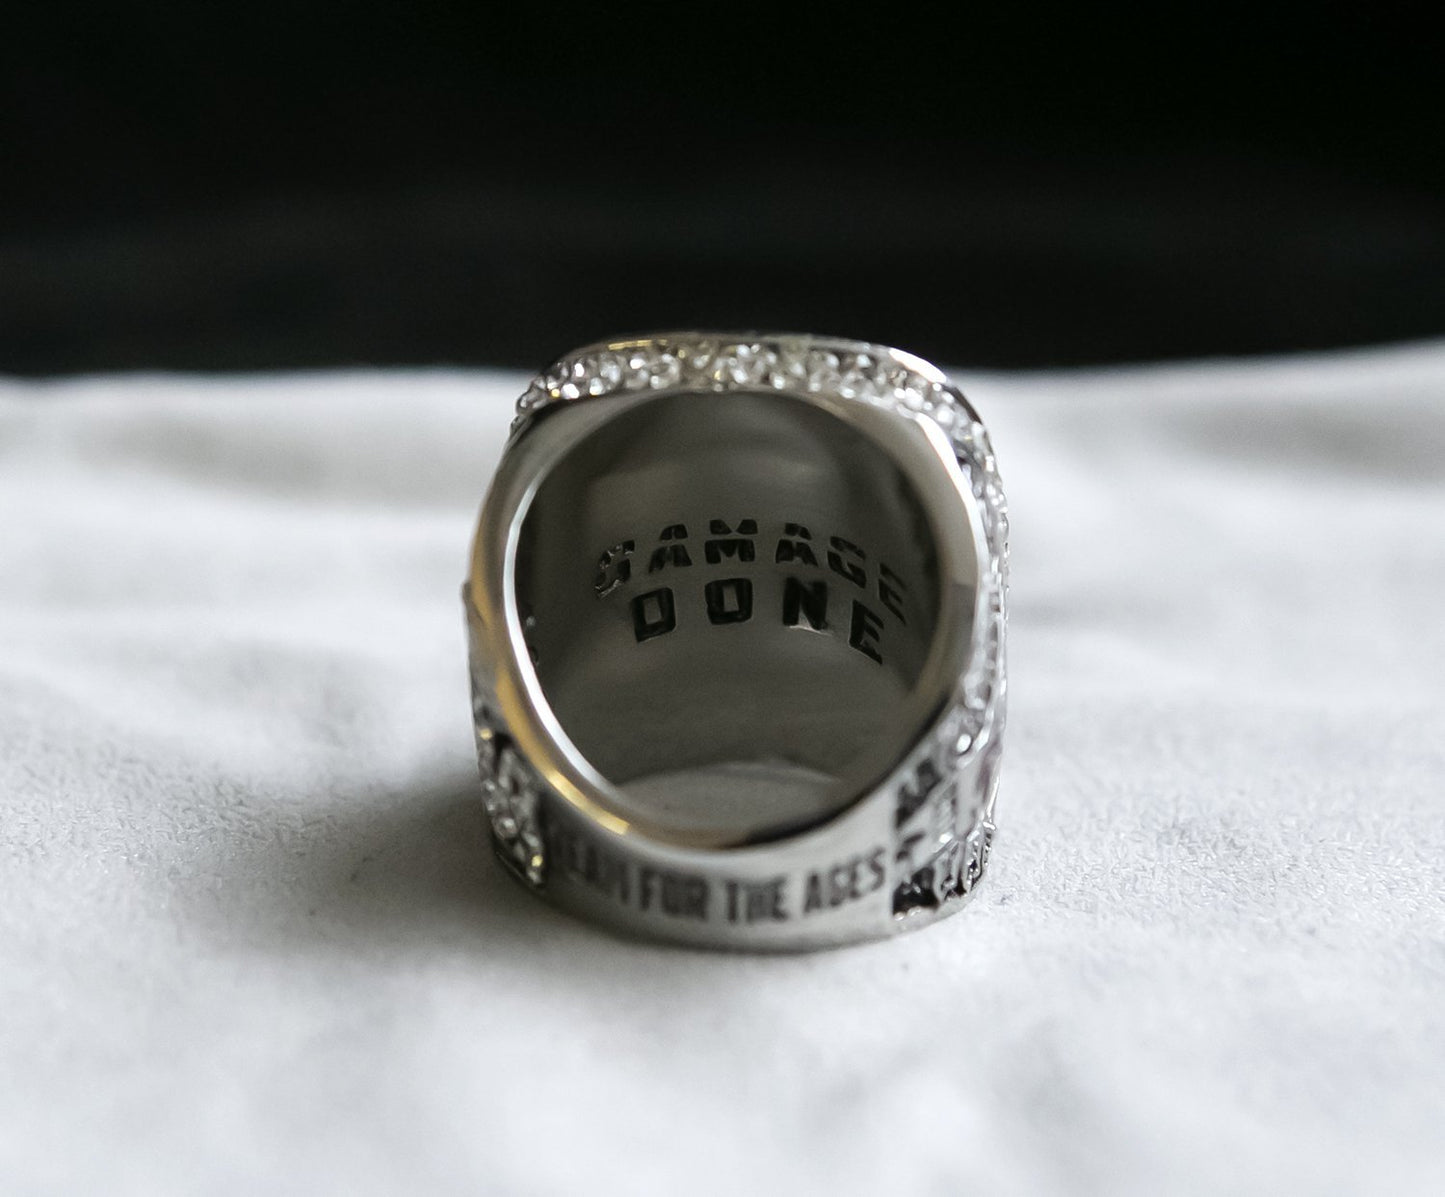 Boston Red Sox World Series Rings (2018) - Rings For Champs, NFL rings, MLB rings, NBA rings, NHL rings, NCAA rings, Super bowl ring, Superbowl ring, Super bowl rings, Superbowl rings, Dallas Cowboys